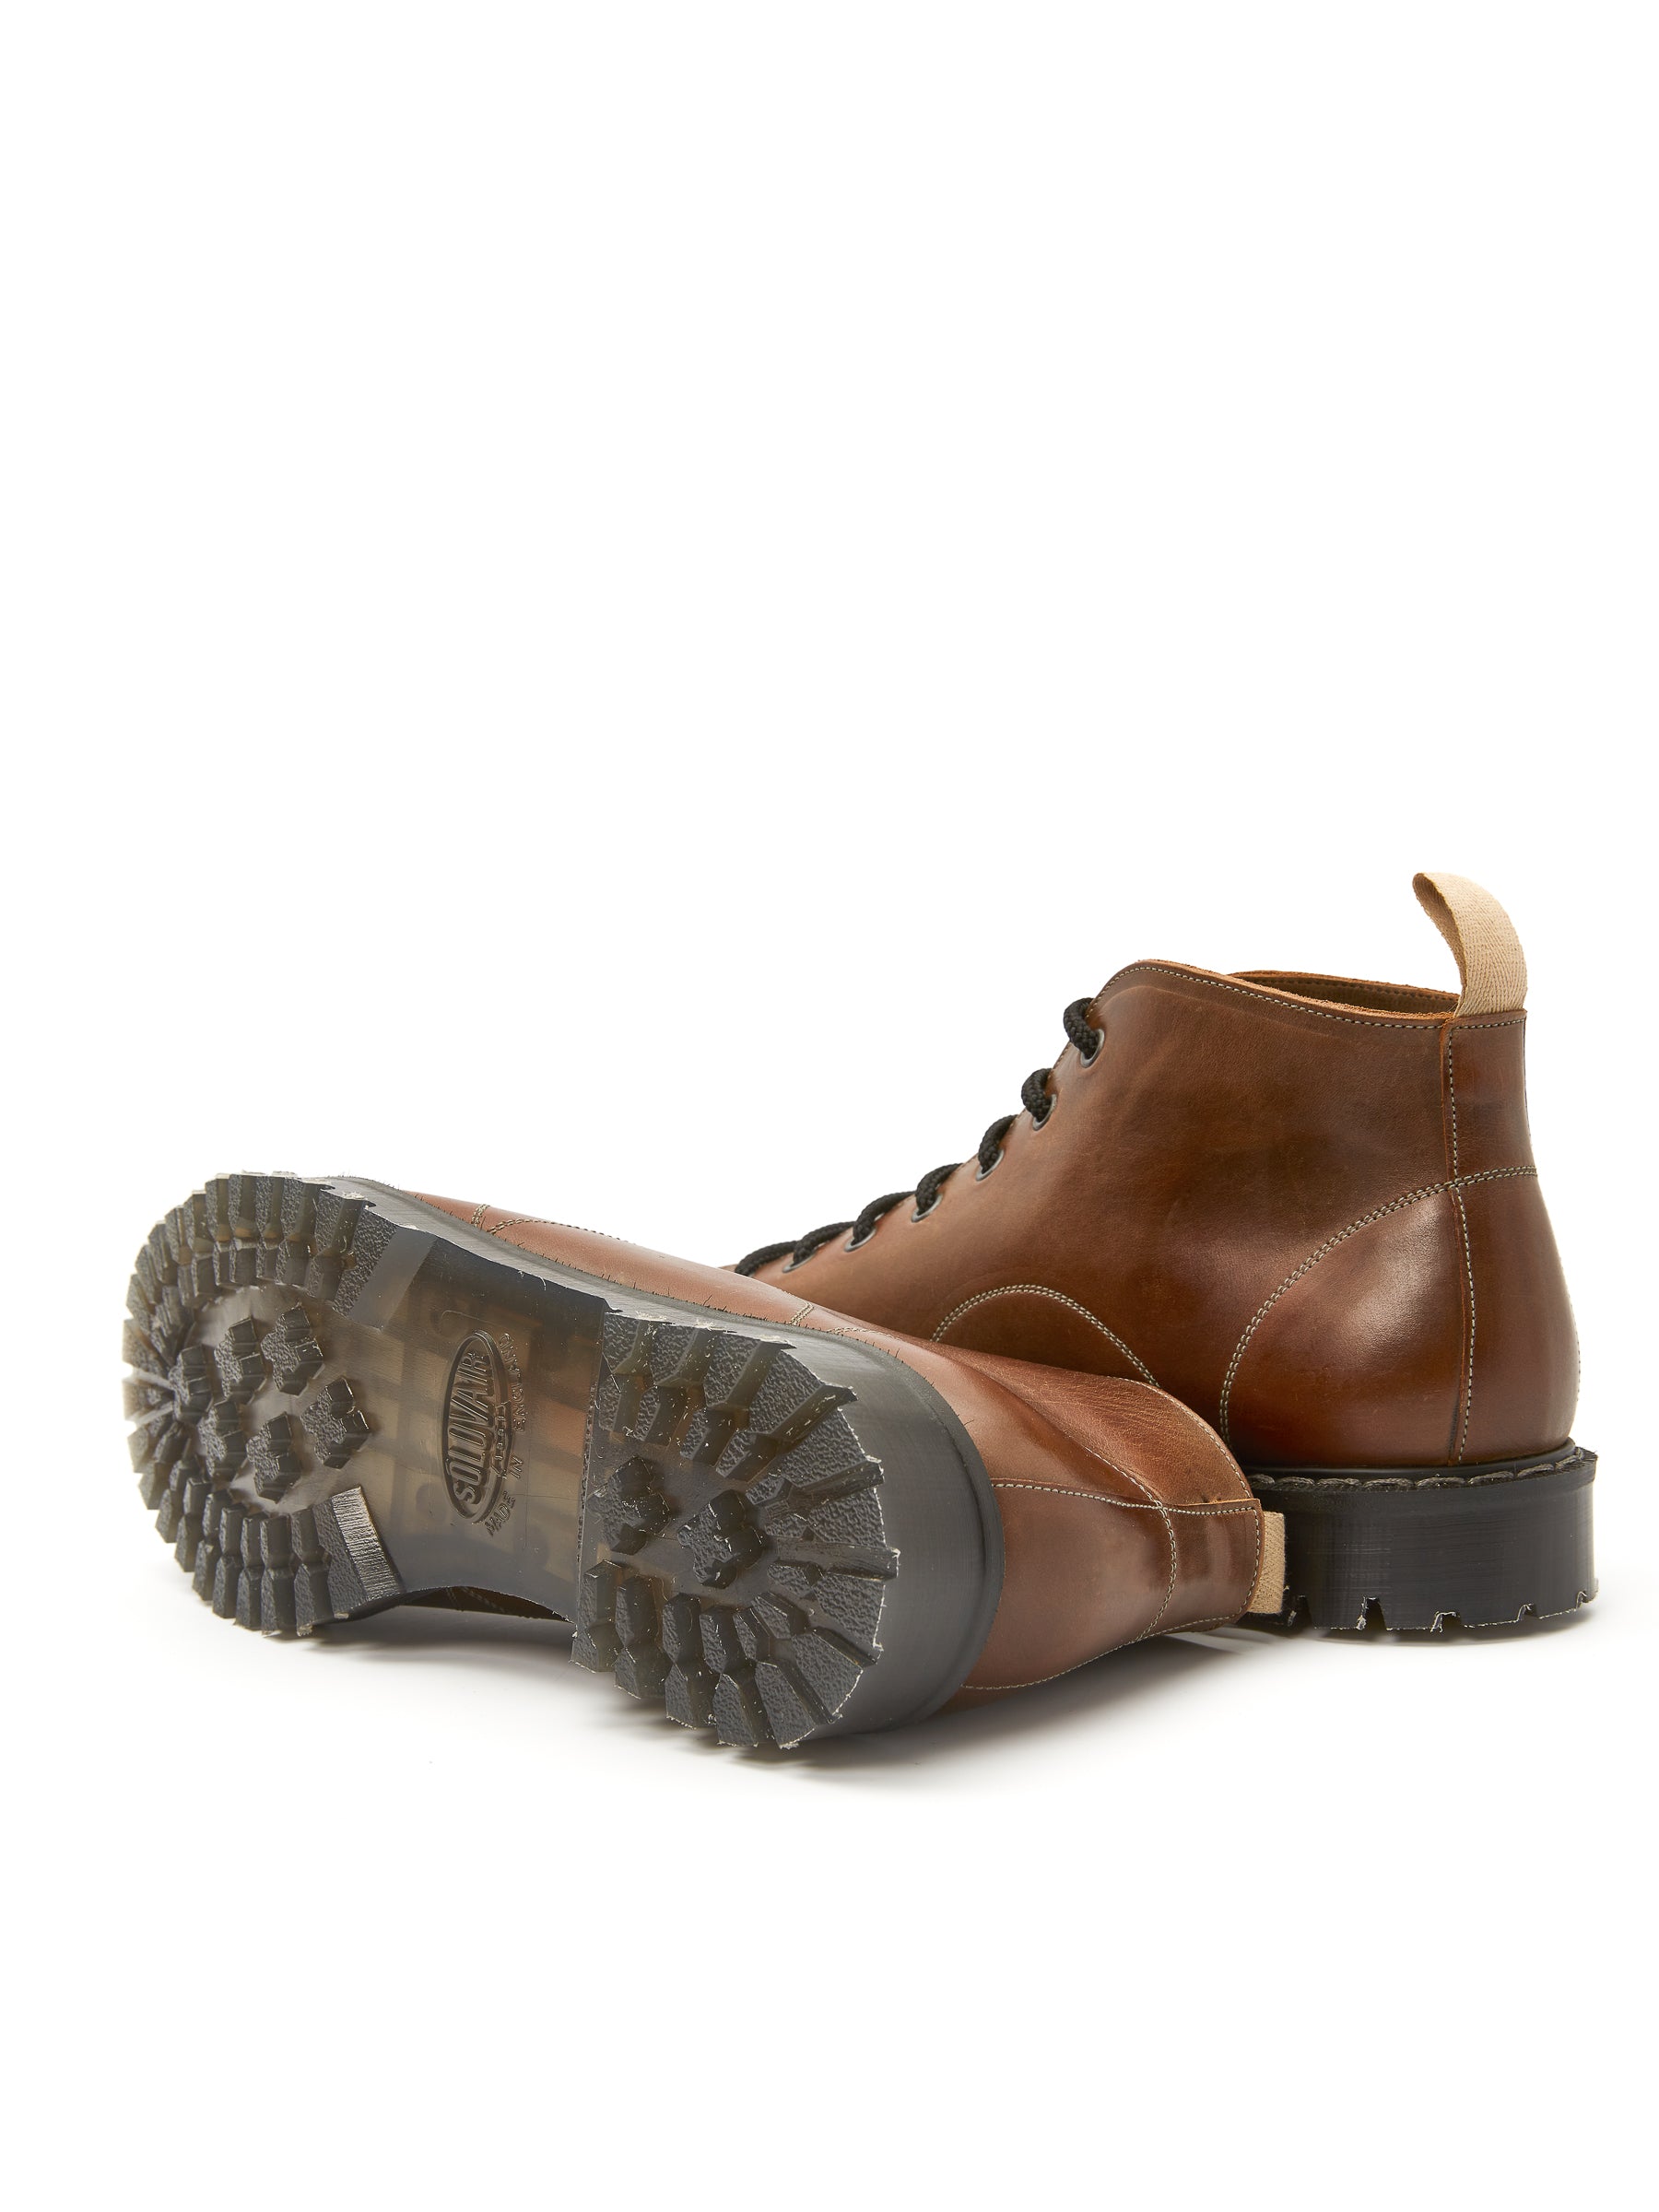 Solovair x Oliver Spencer Brown Gaucho Leather Monkey Boots